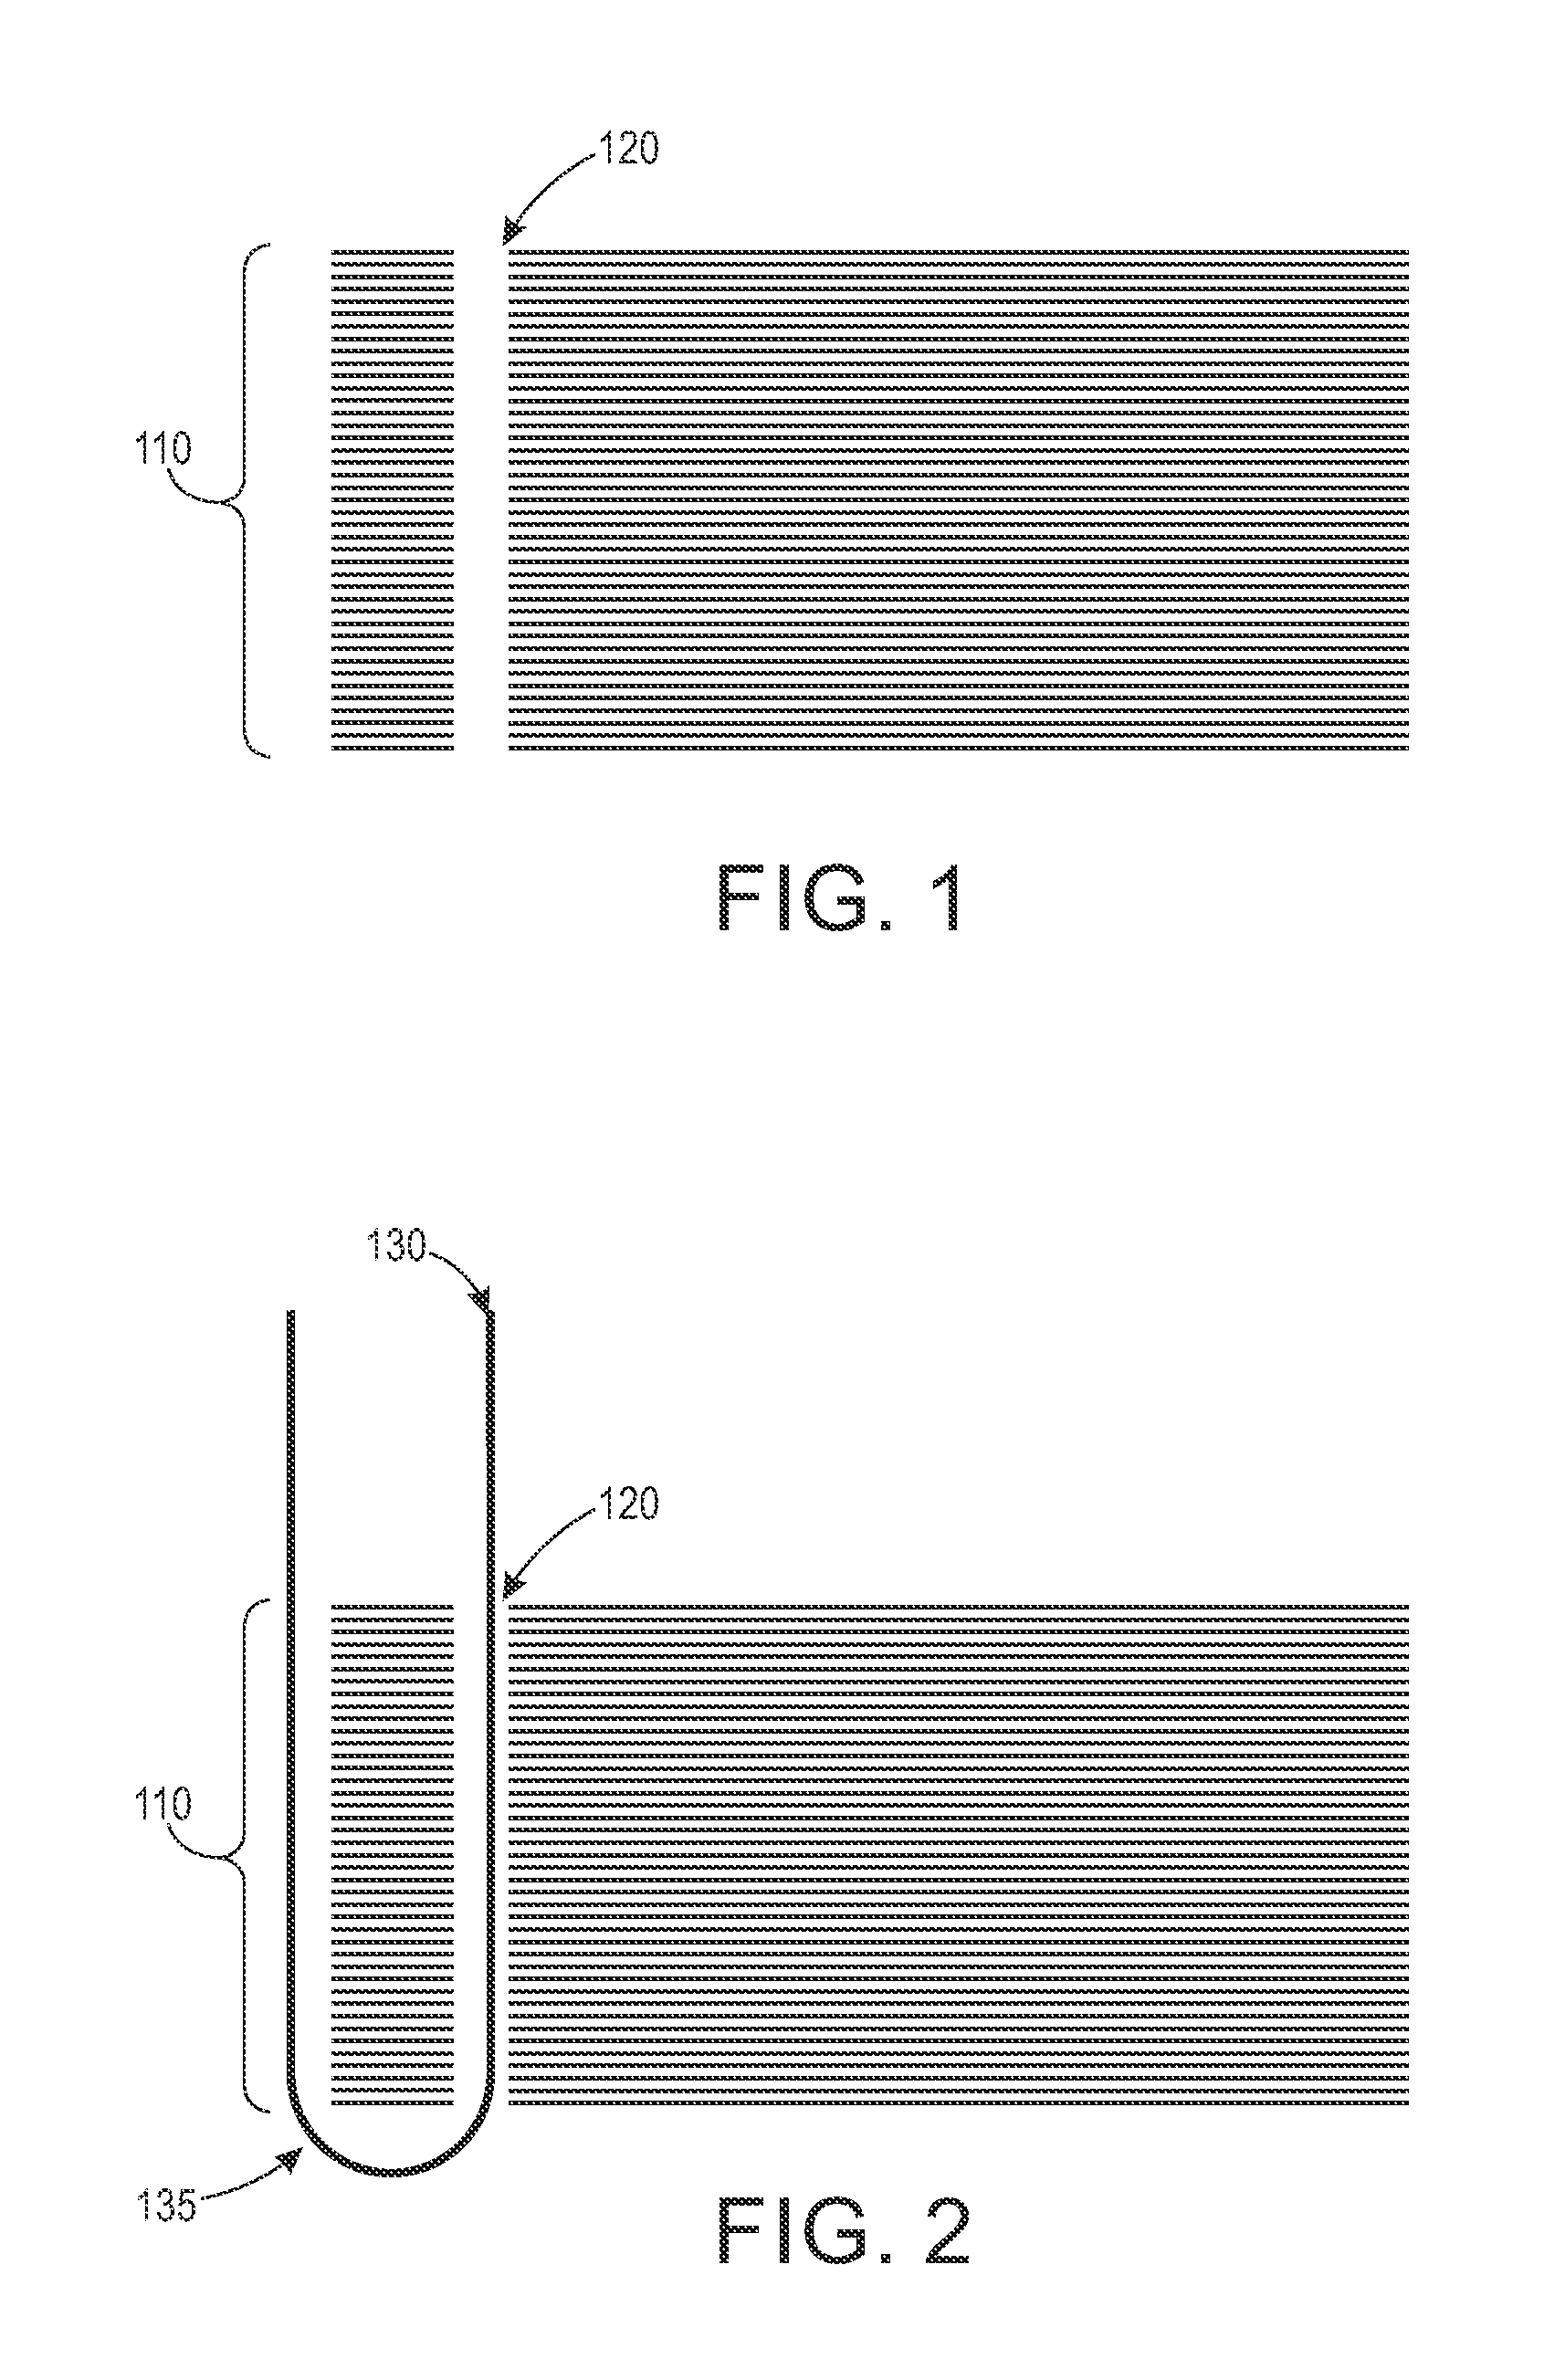 Systems and methods for forming and implementing book binding geometries as a function of stack thickness